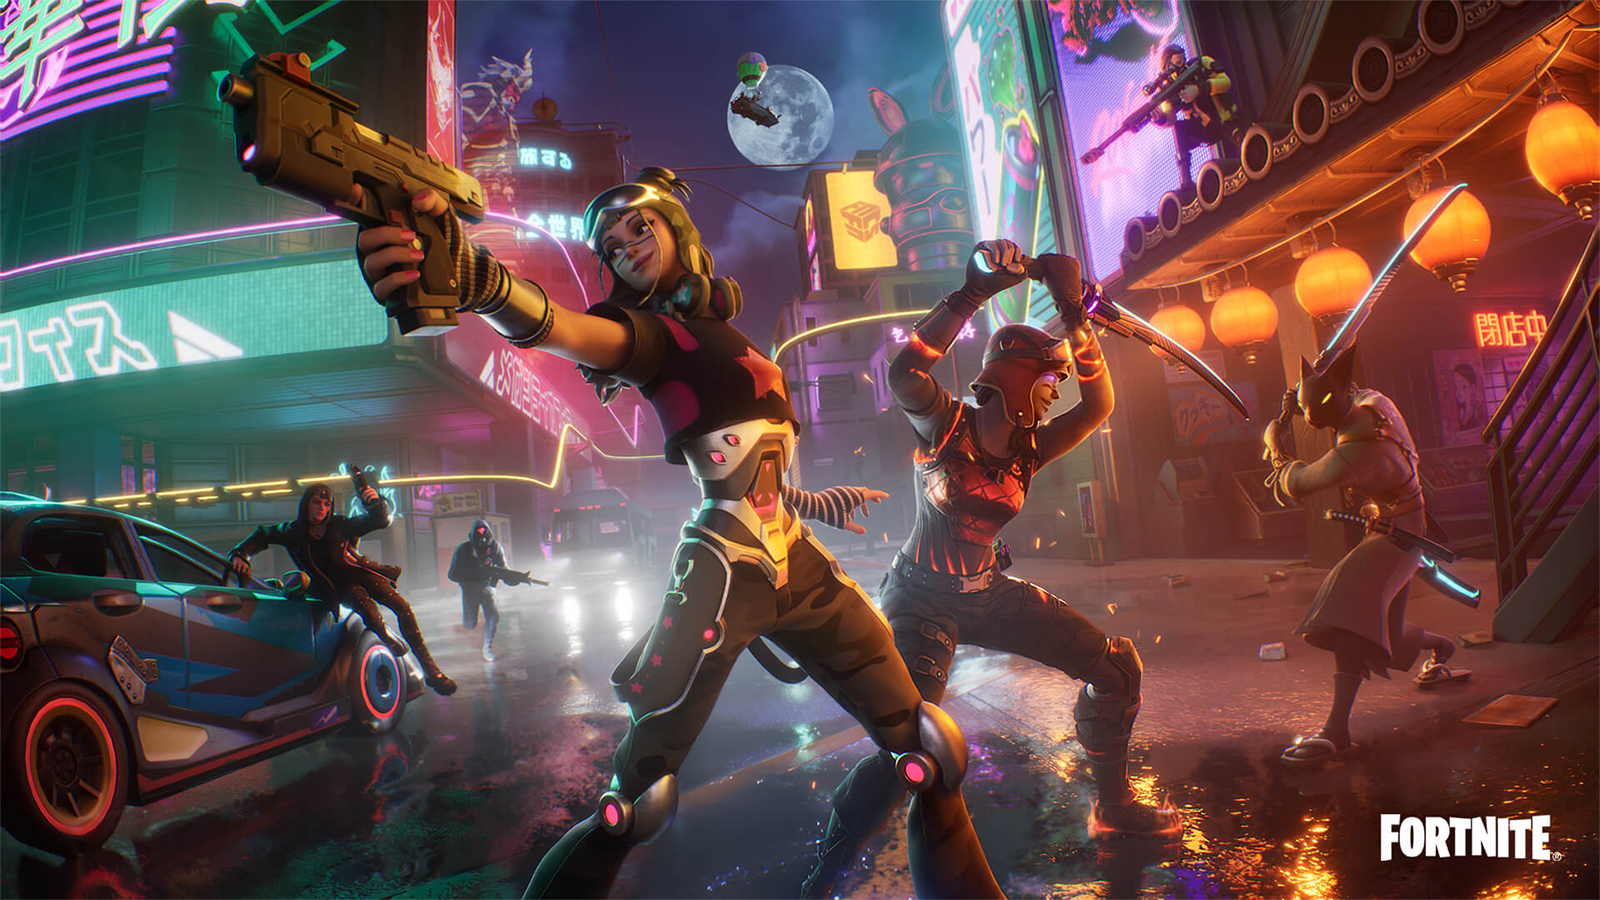 Fortnite update 24.40 patch notes: Ranked mode, Spider-Verse crossover &  balance changes - Dexerto